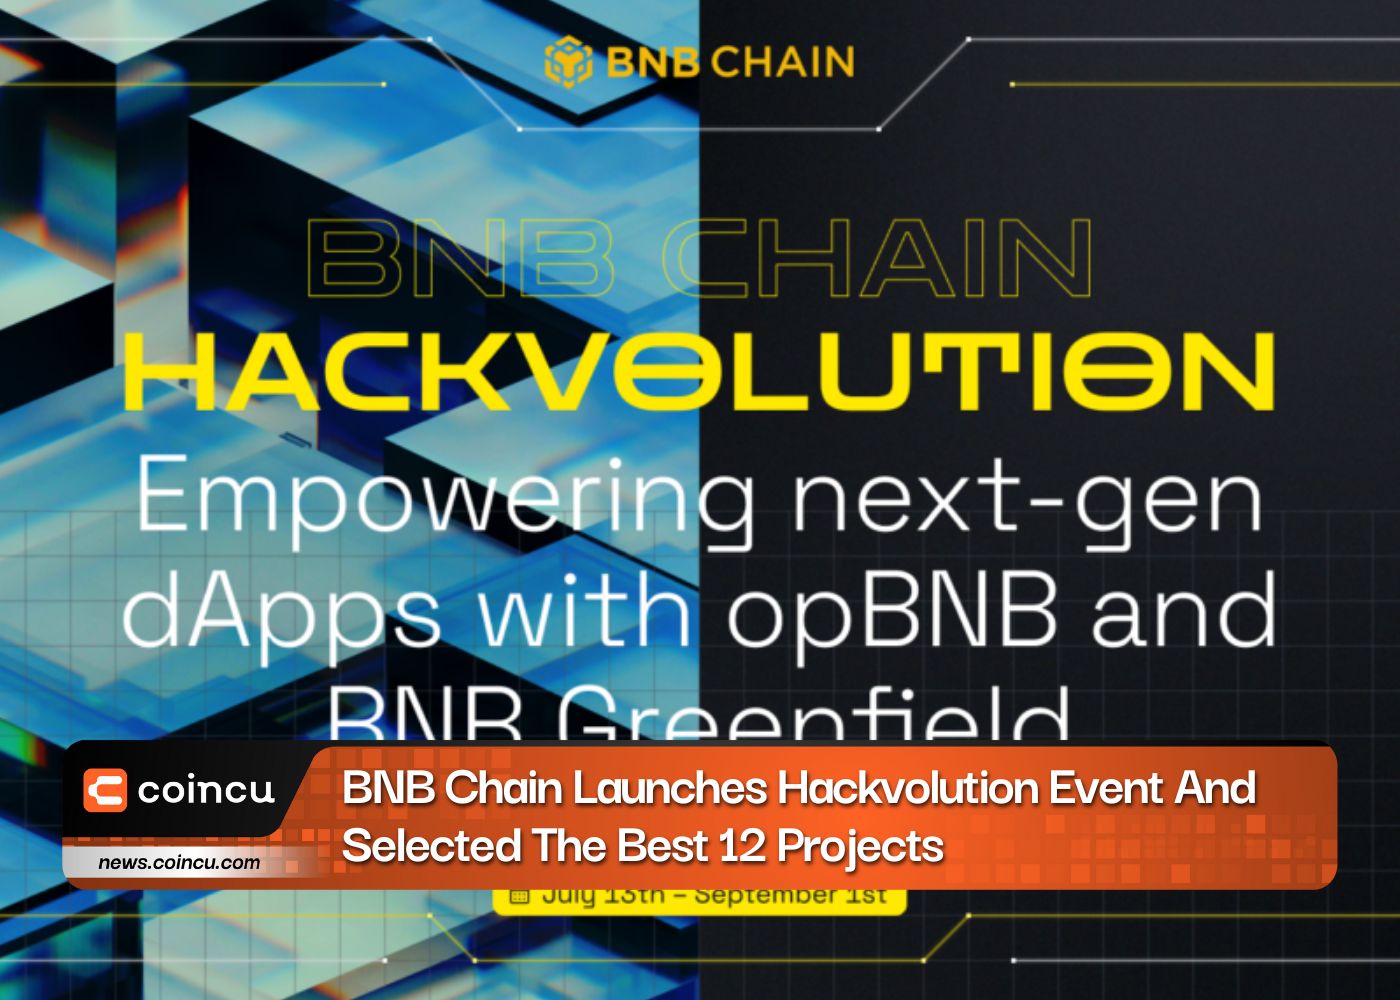 BNB Chain Launches Hackvolution Event And Selected The Best 12 Projects